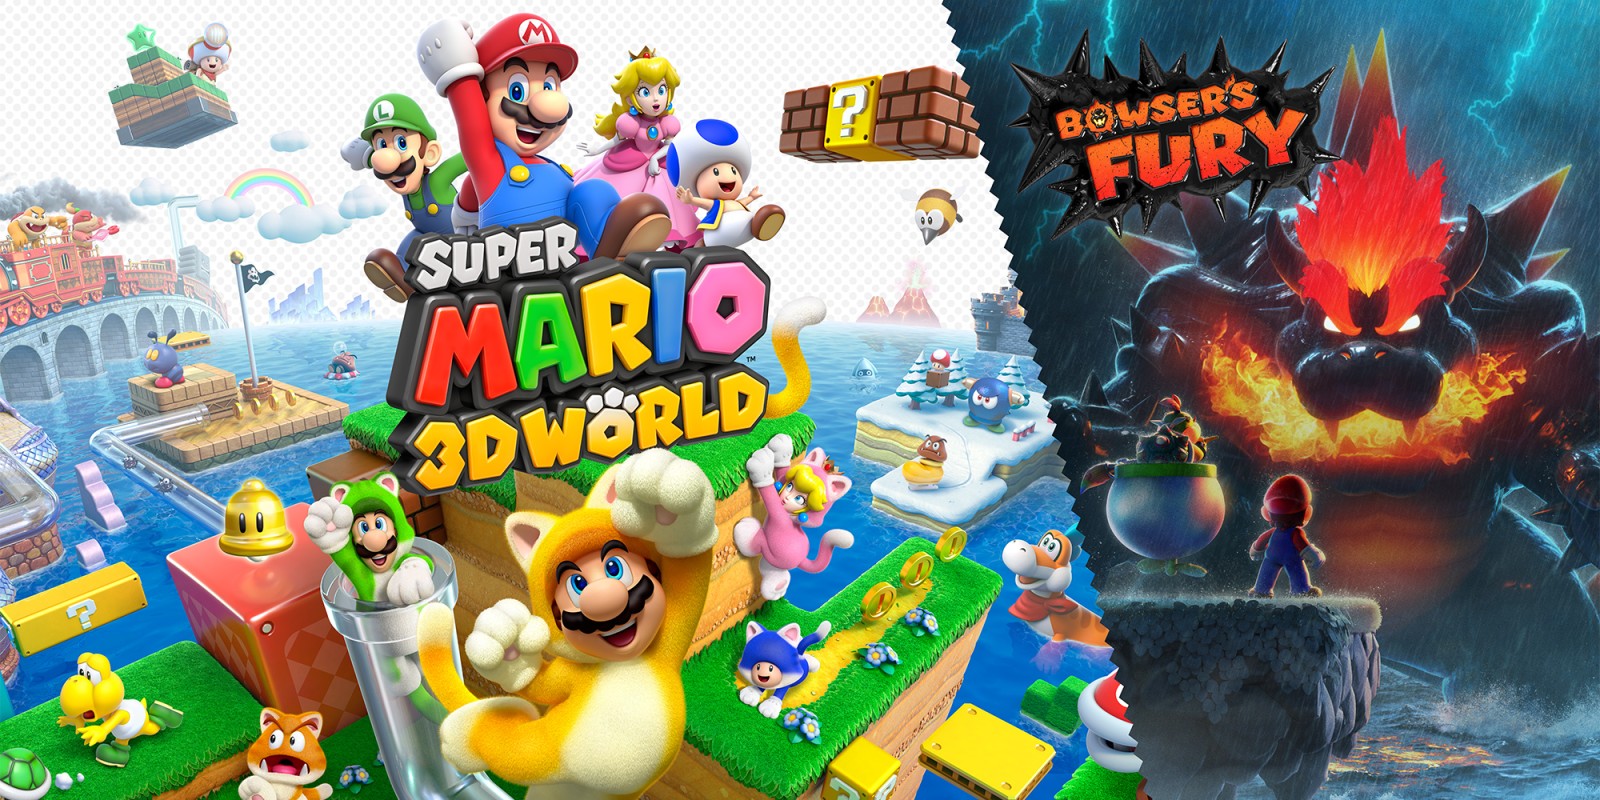 La5t Game You Fini5hed And Your Thought5 - Page 6 H2x1_NSwitch_SuperMario3DWorldAndBowsersFury_image1600w